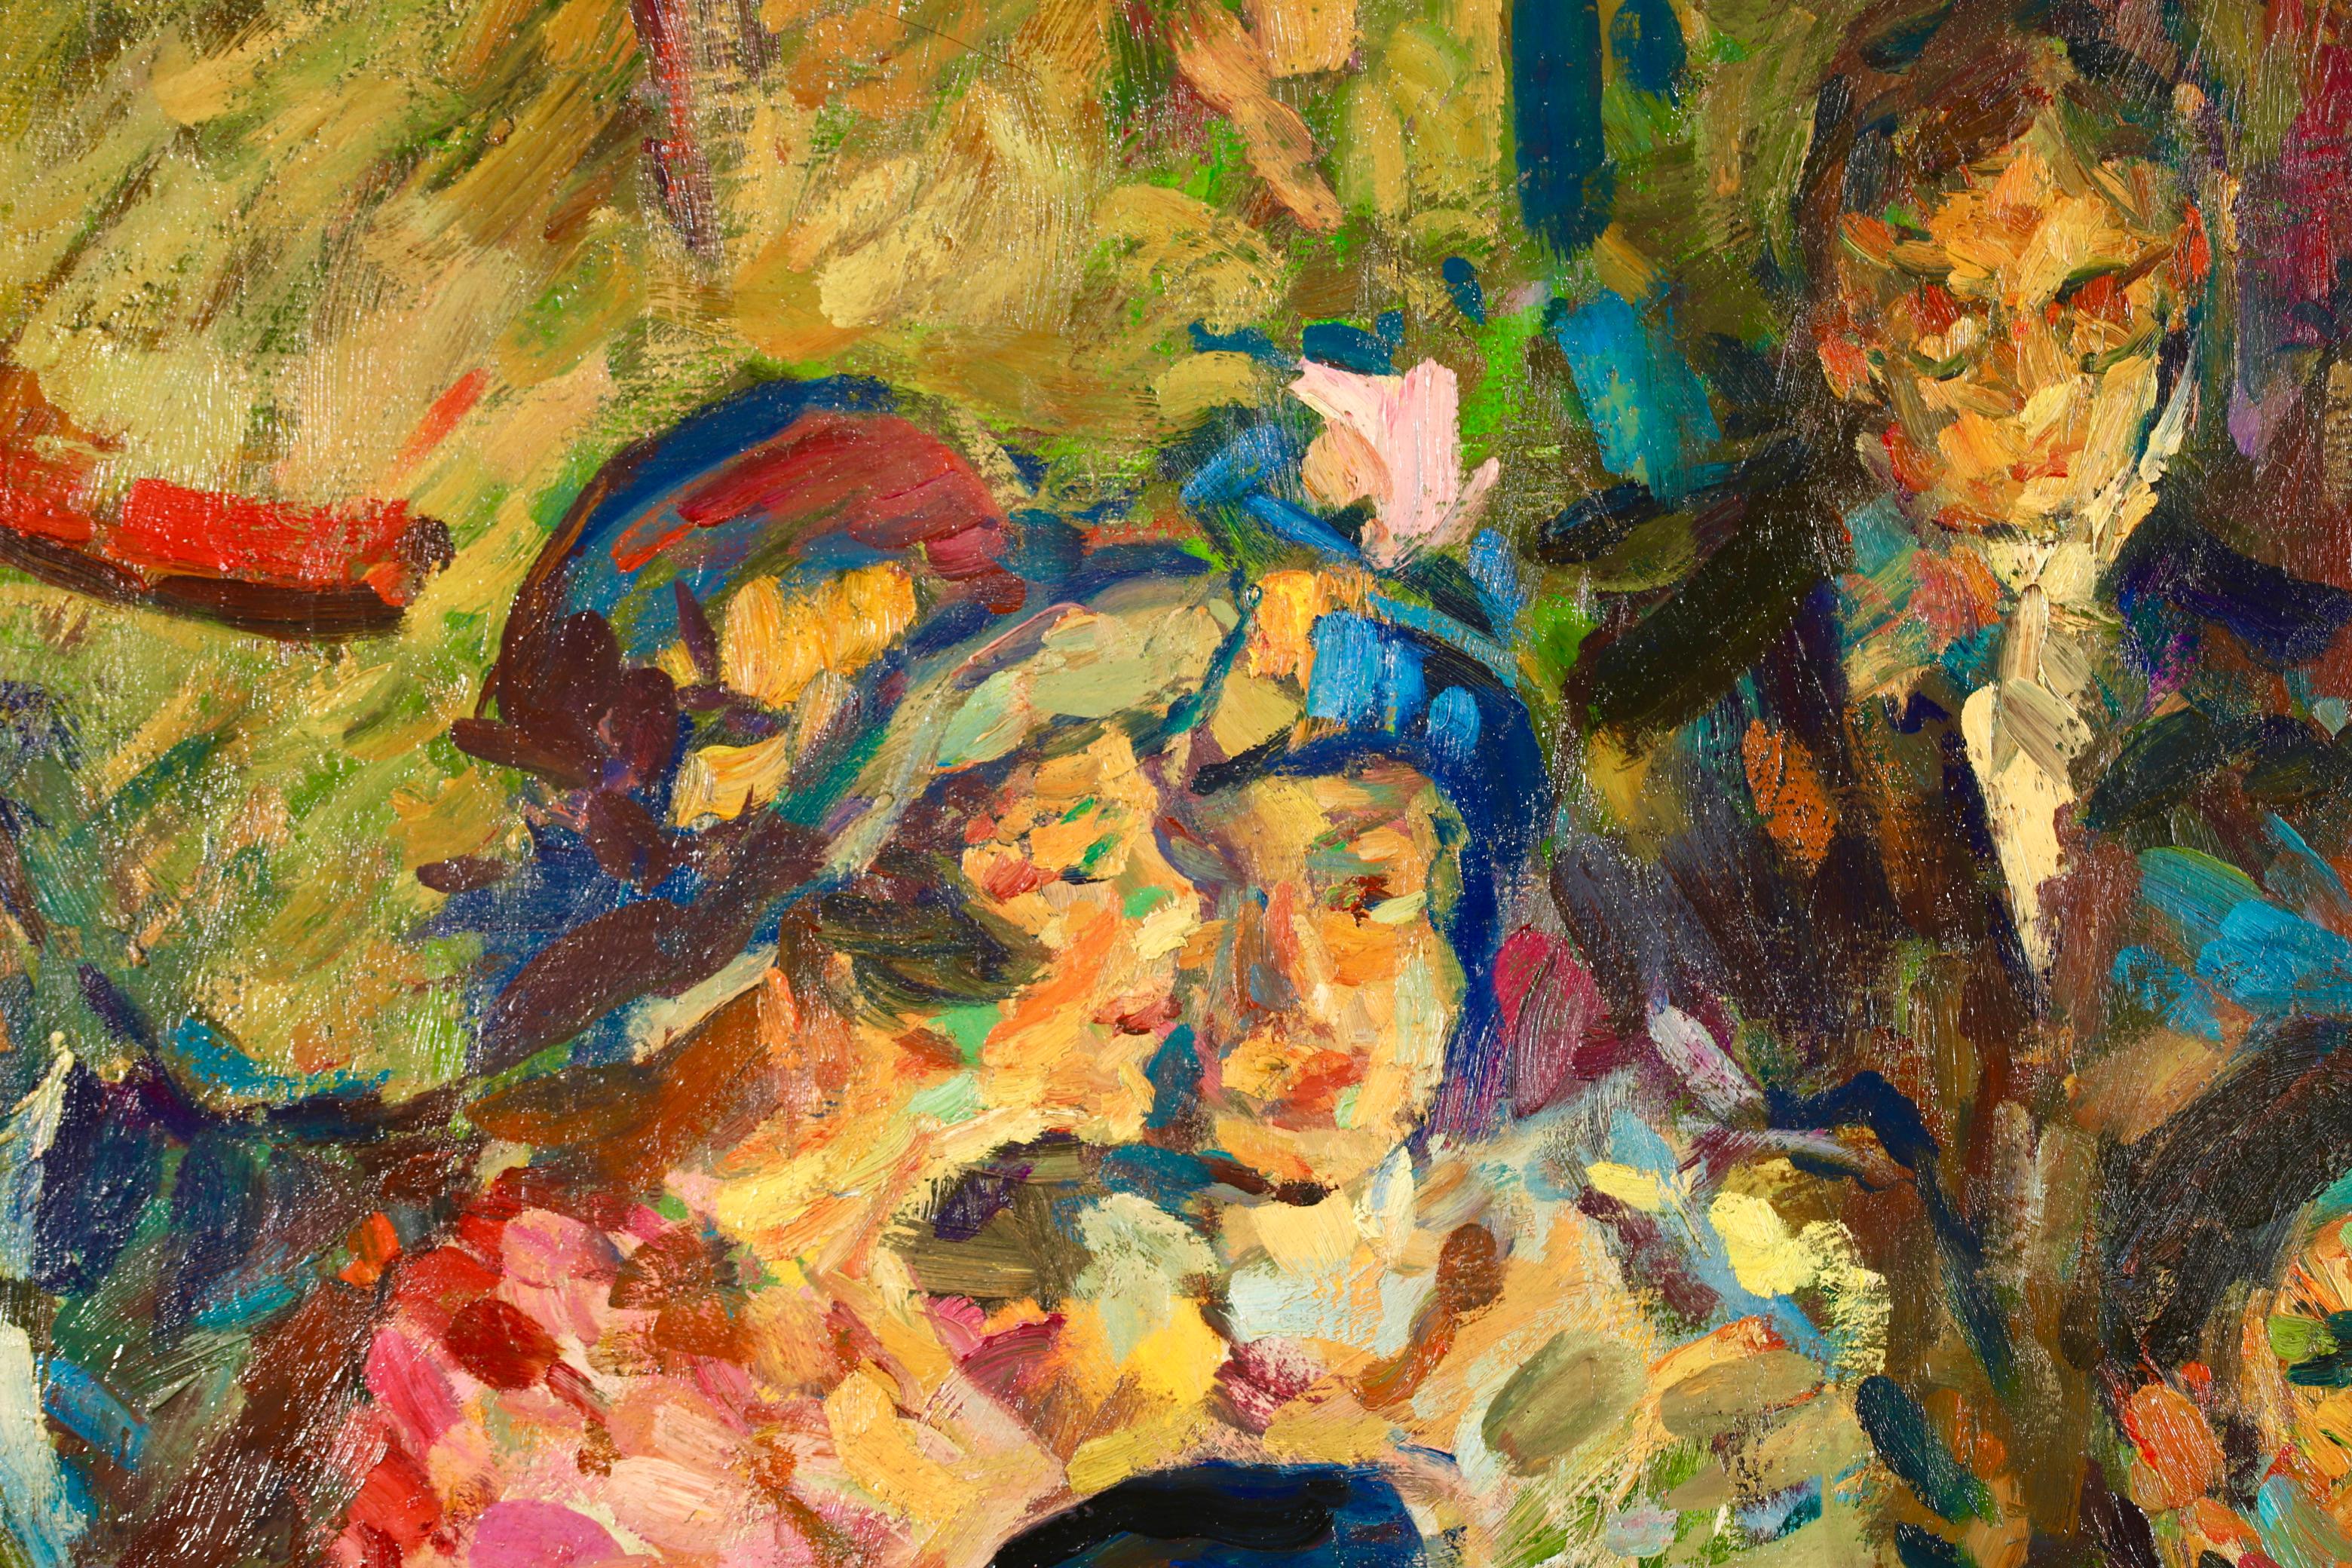 Signed figurative oil on canvas circa 1920 by Russian-born post impressionist painter Elie Anatole Pavil. This beautifully coloured work depicts men and a women seated at a theatre peering over a balcony.

Signature:
Signed lower